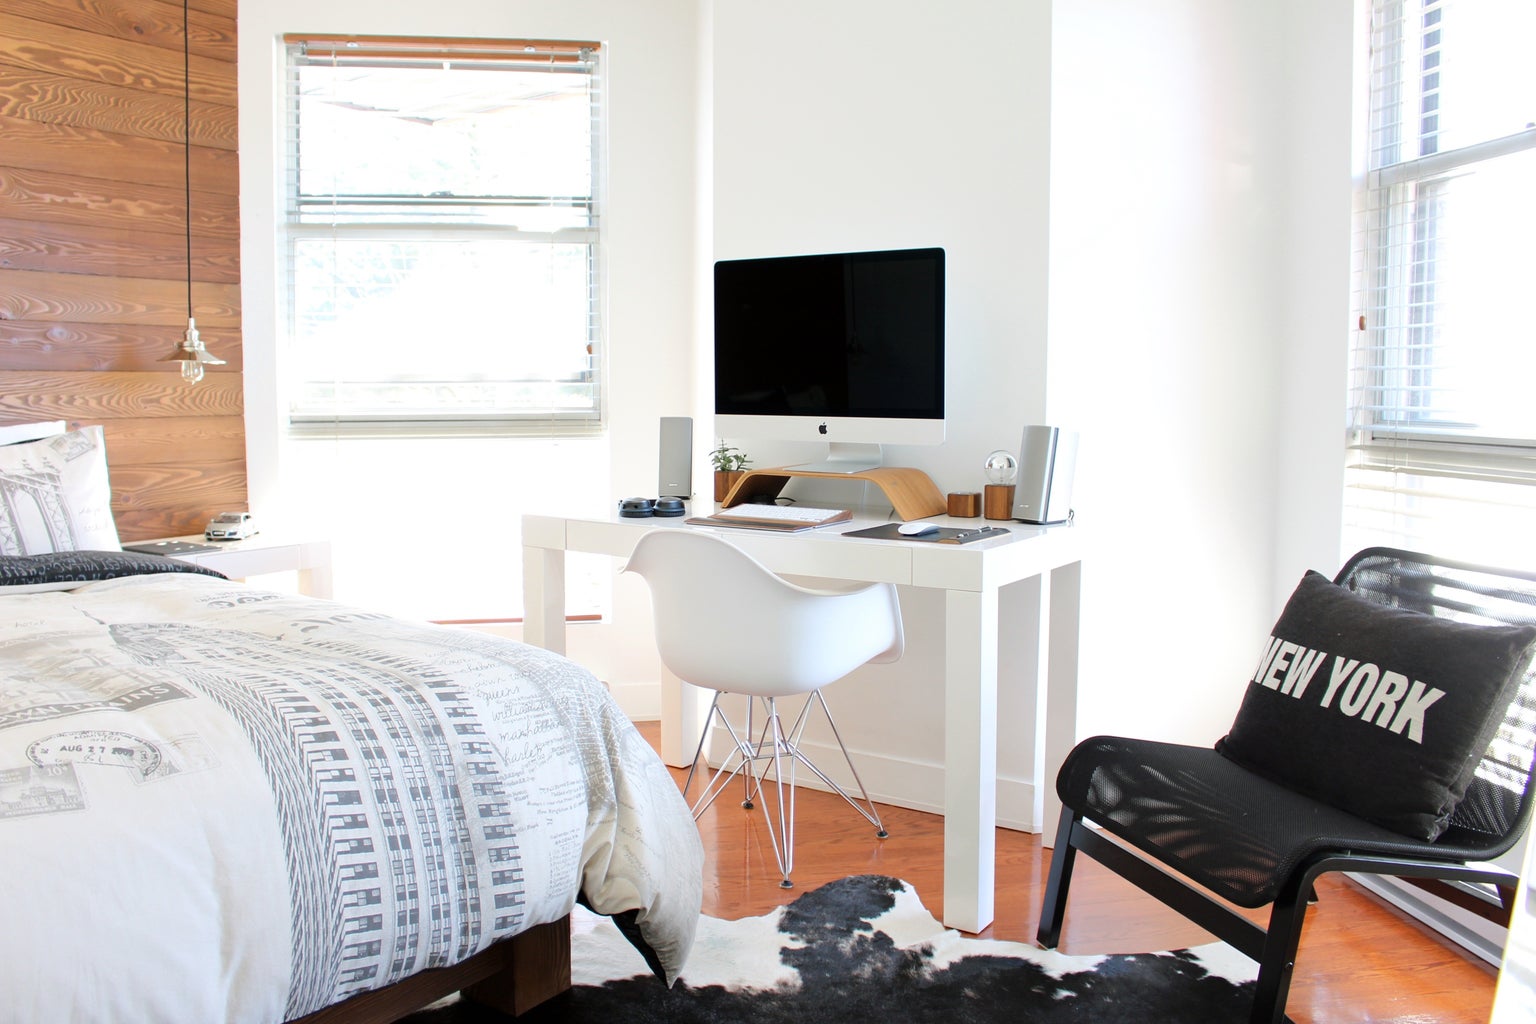 bright white bedroom with desk working space